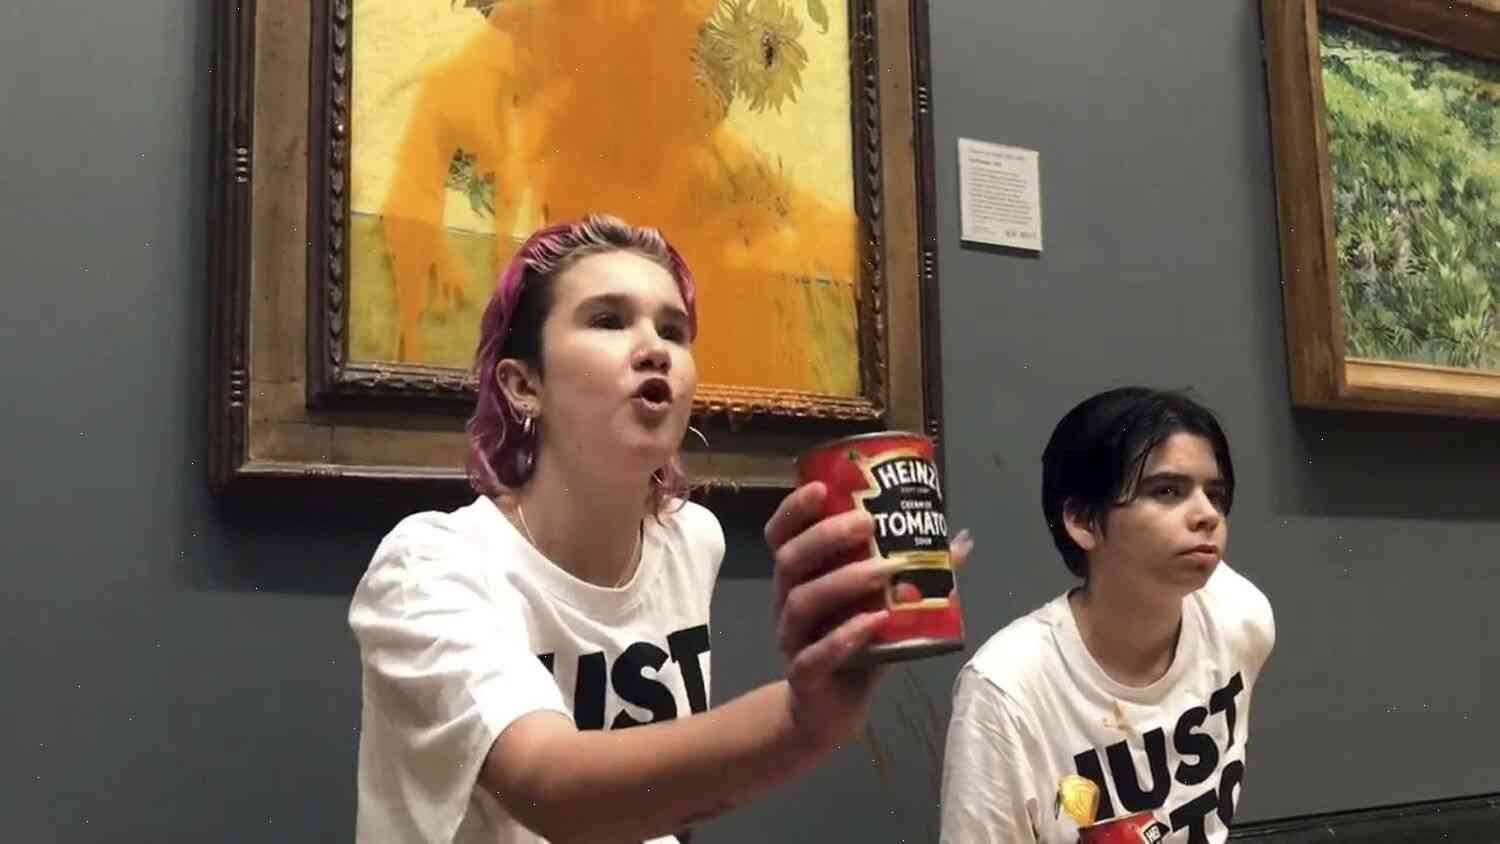 Is smearing food on the "Mona Lisa" a productive form of climate change protest?